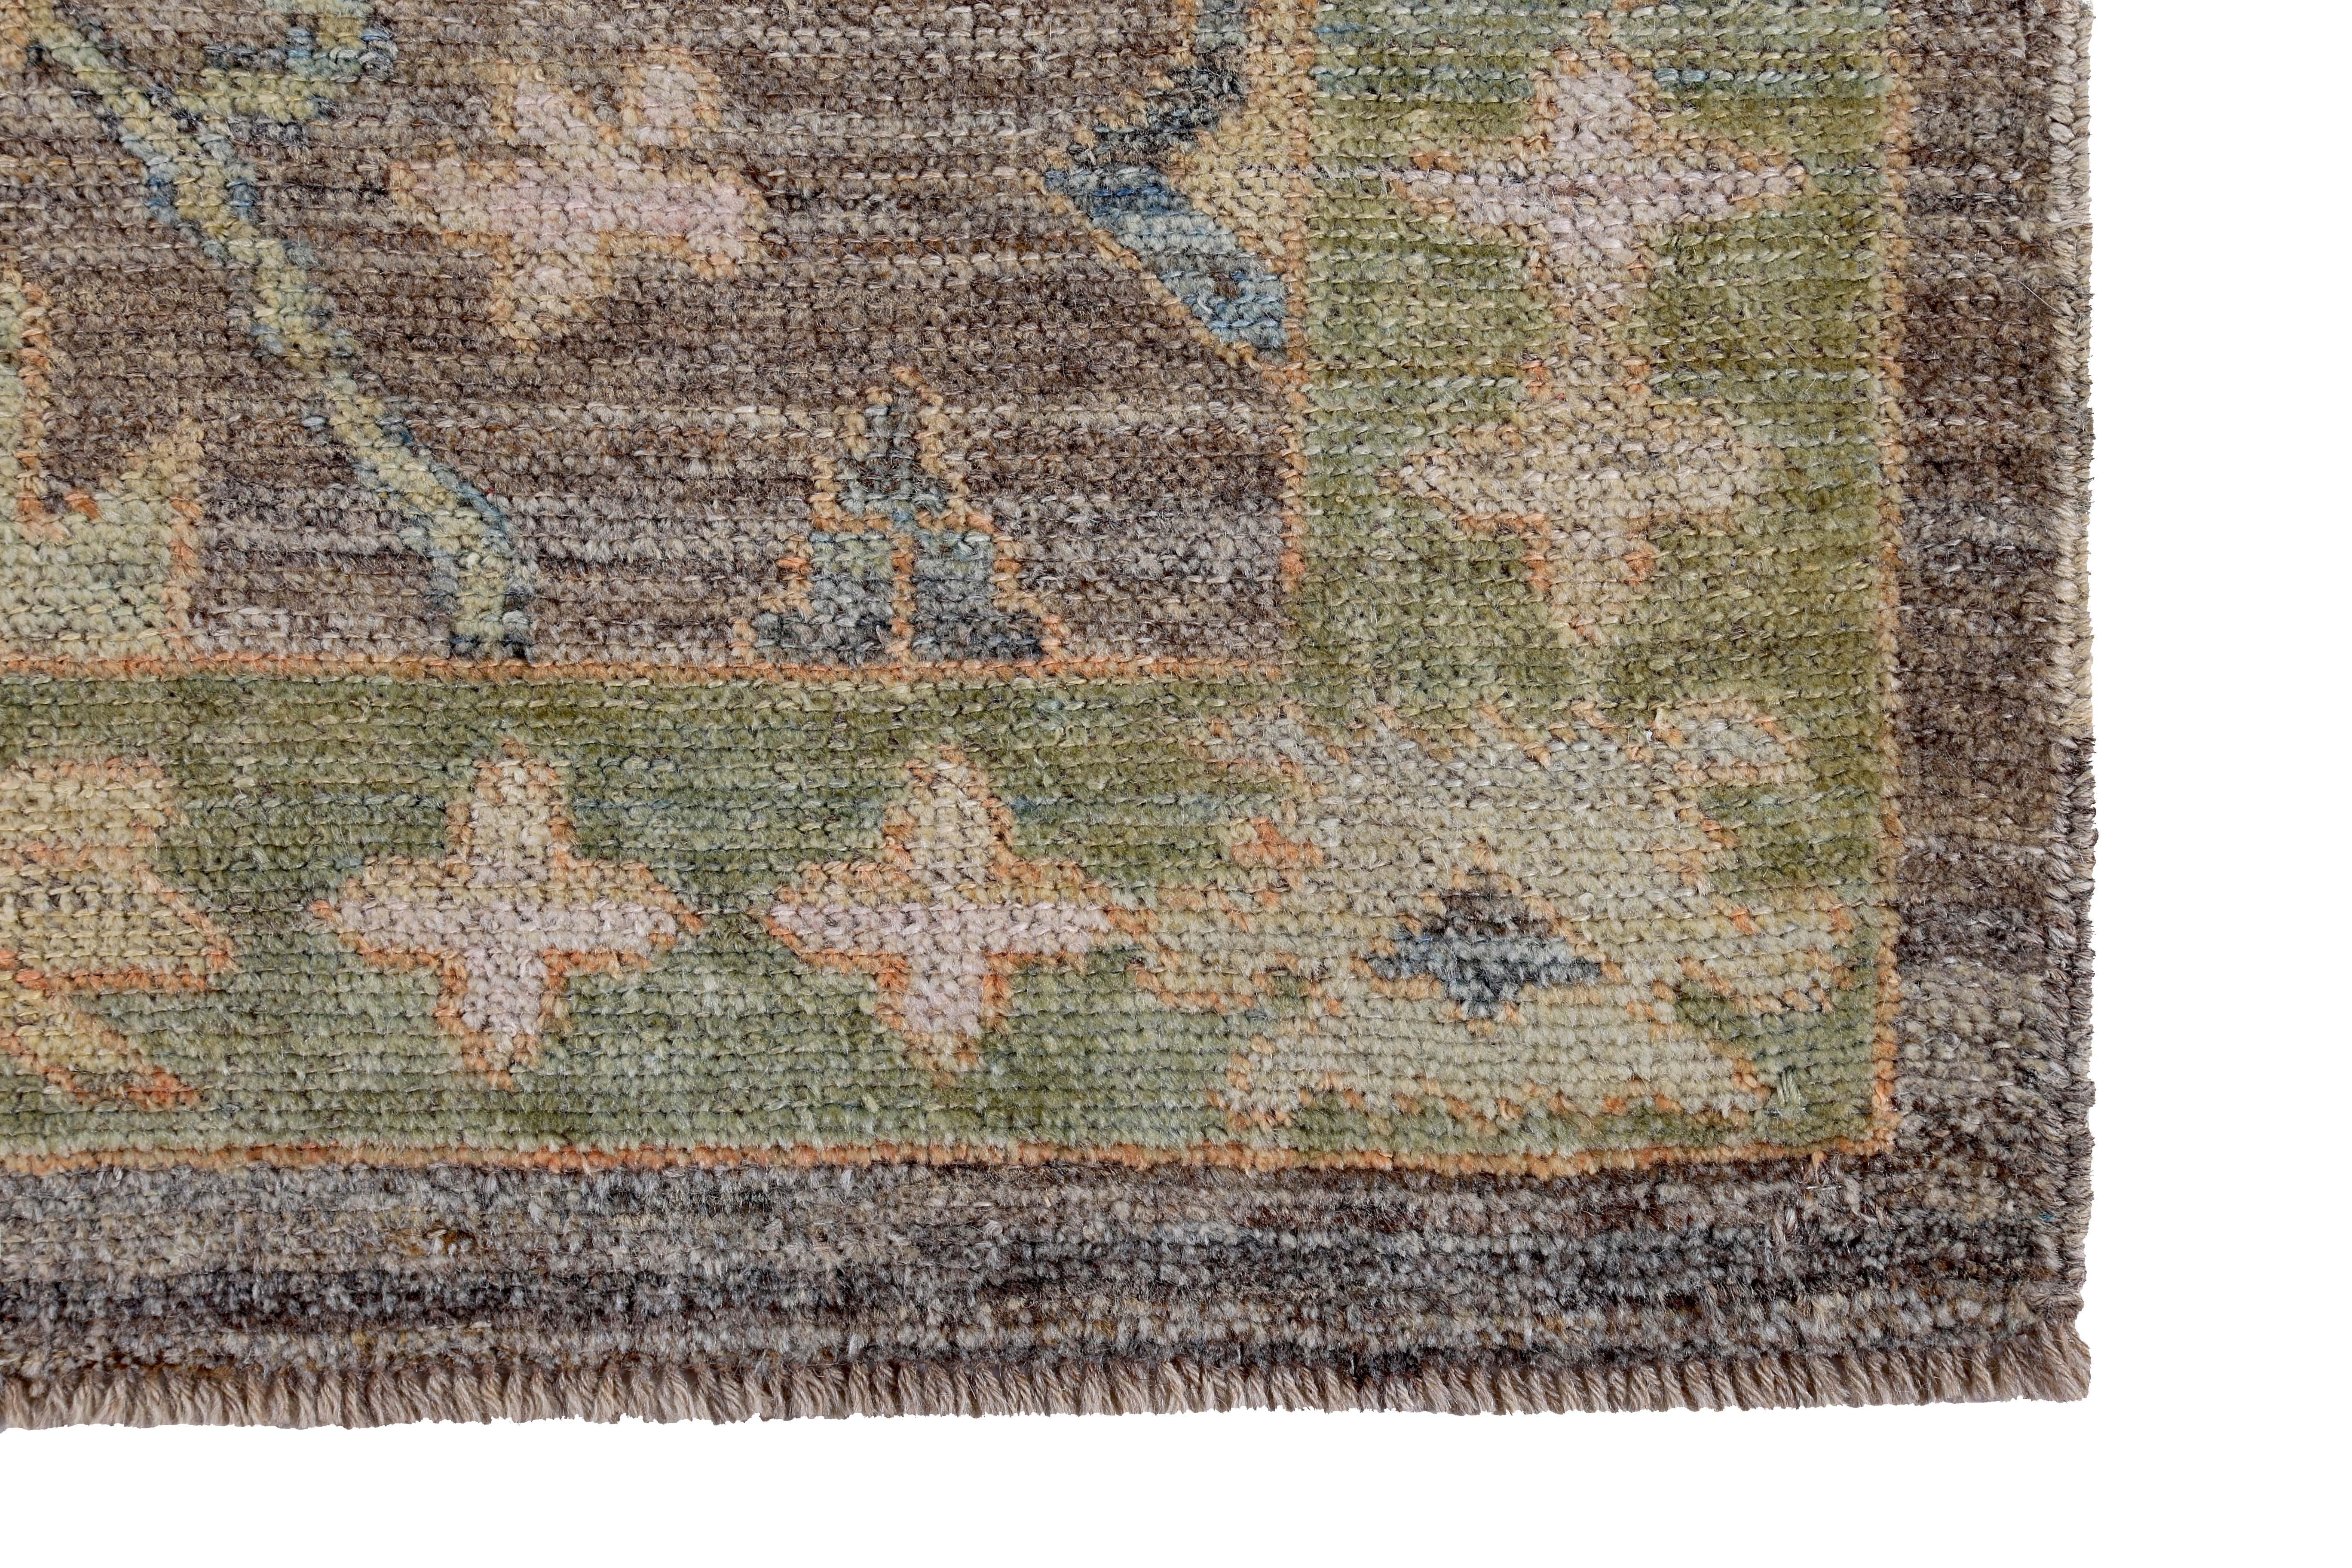 Turkish Oushak Runner Rug with Blue Floral Patterns on Brown and Green Field In New Condition For Sale In Dallas, TX